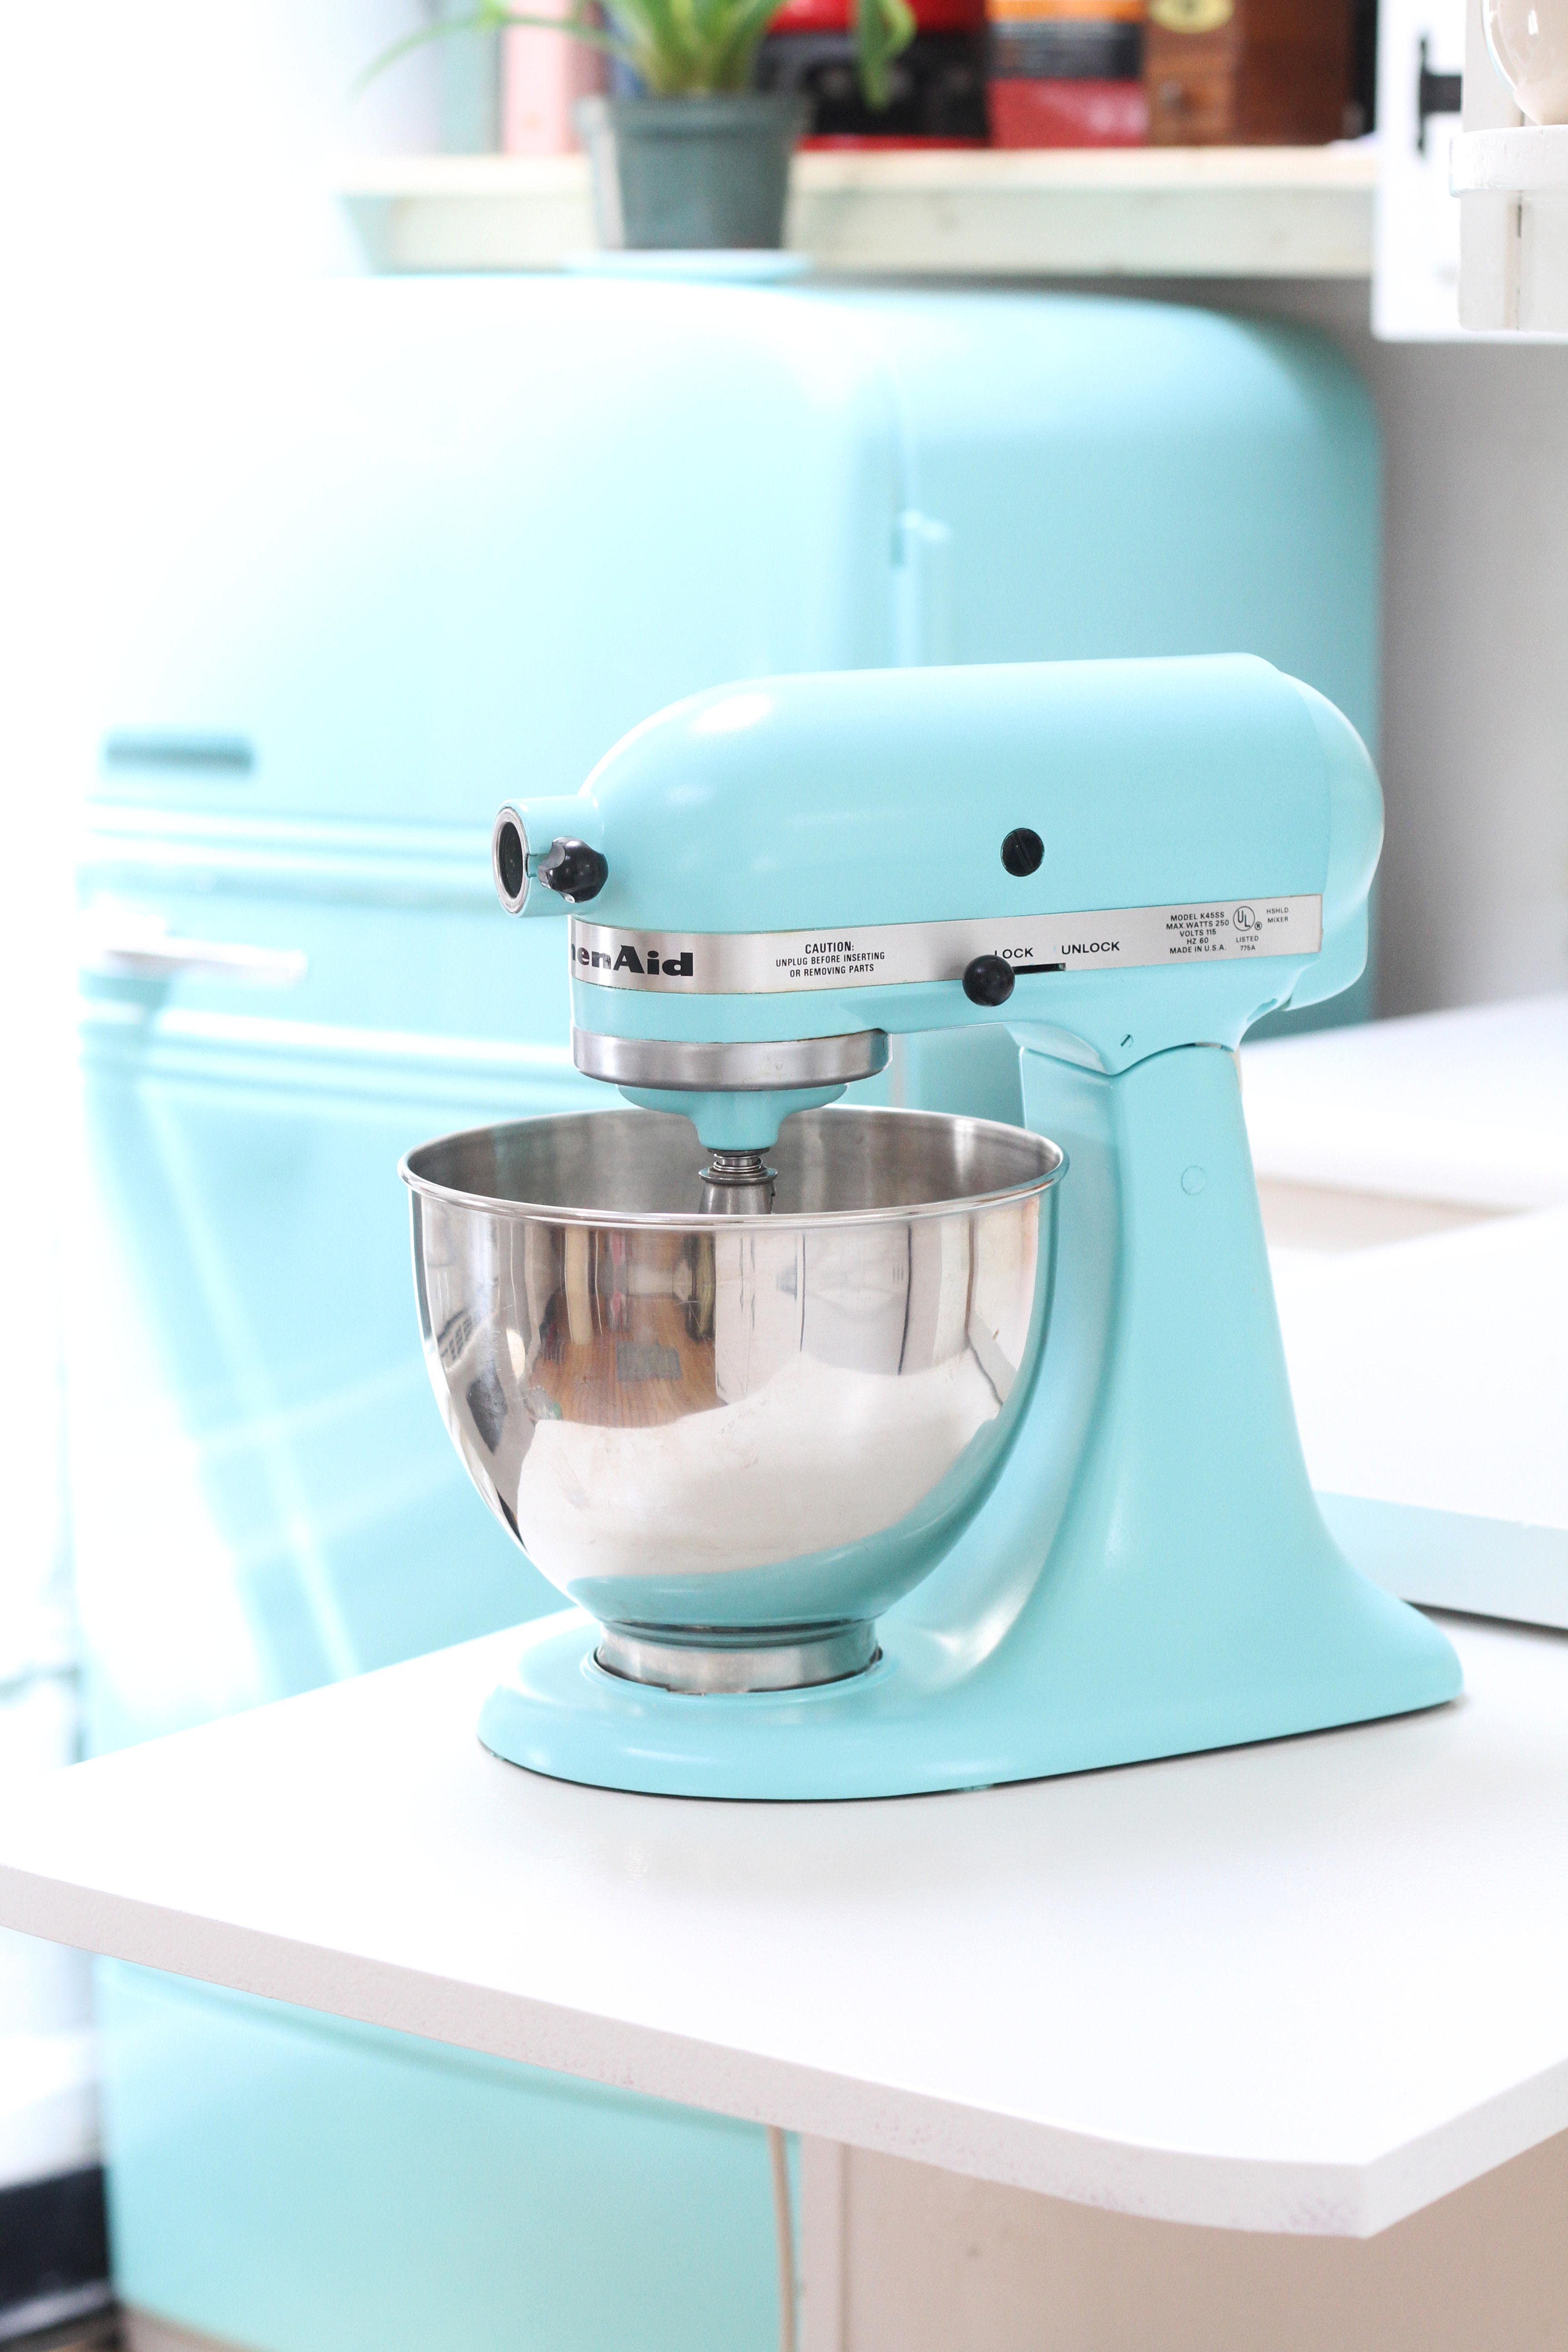 How to Fix a KitchenAid Stand Mixer That Is Leaking Oil/Grease